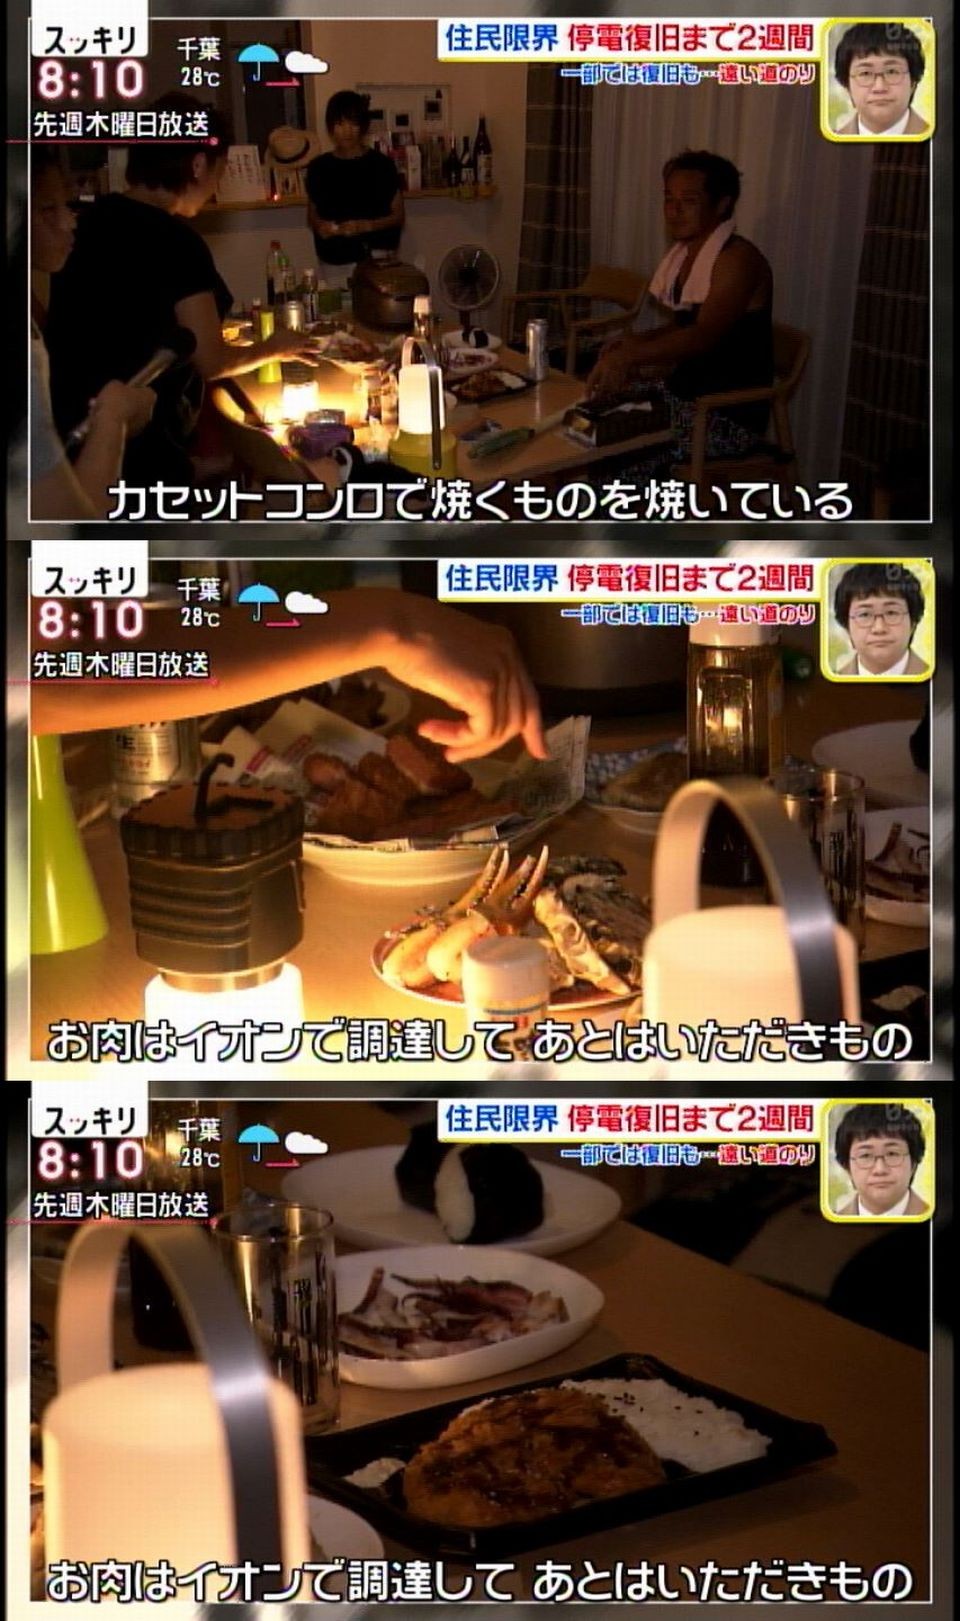 [Sad news] Chiba Prefecture residents during a power outage, only this meal